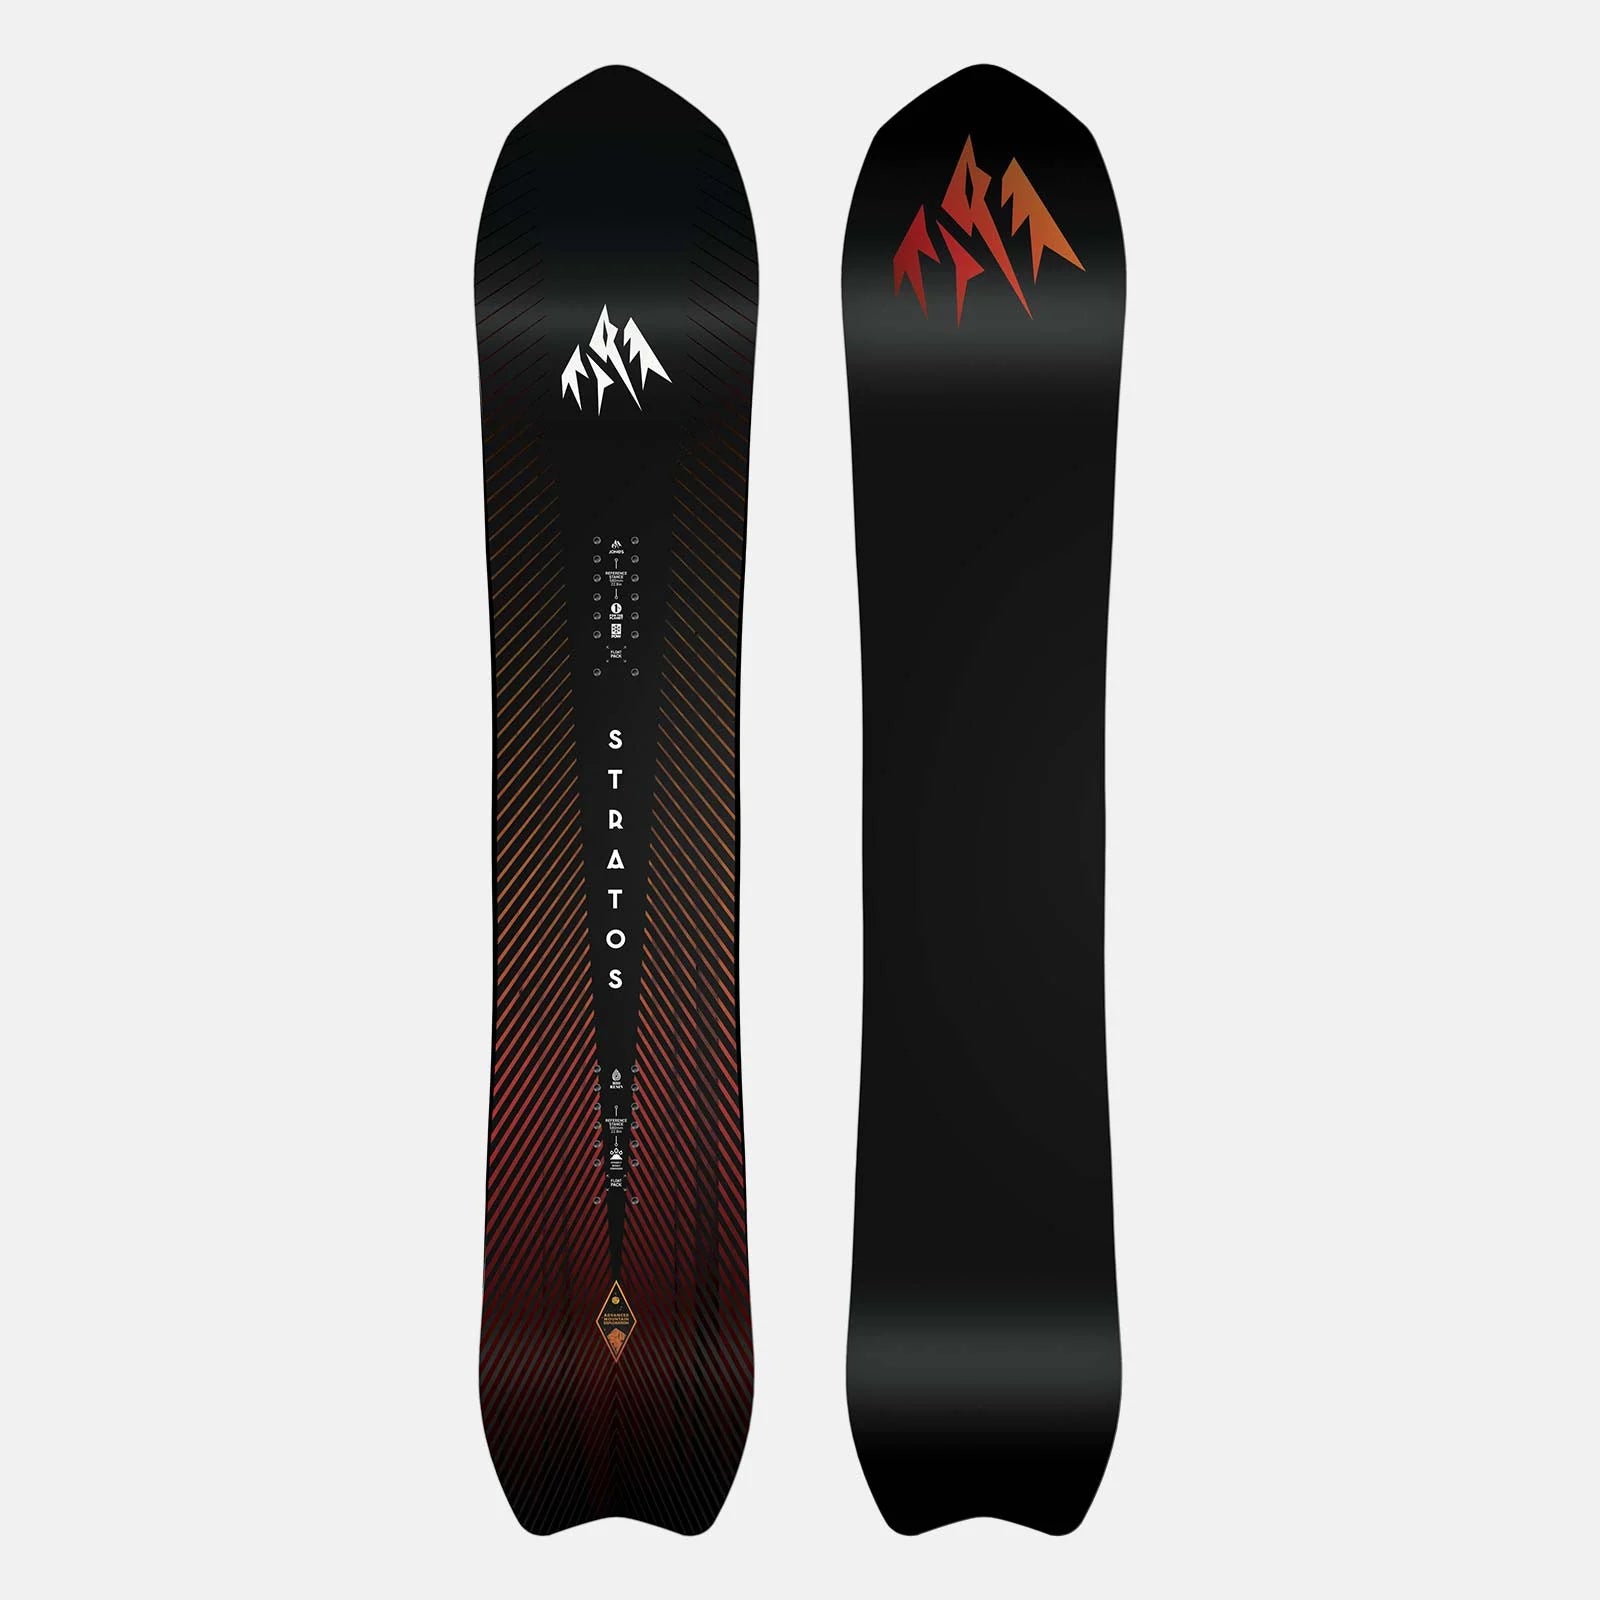 The Stratos is a hybrid all-mountain board that's built for creative freeriding and all-terrain trickery. A tapered directional freeride shape matched with a freestyle board feel make the Stratos incredibly playful and agile in pow and mixed conditions. The Stratos wants to slice turns and bounce down the mountain popping off every bump, jump or cliff.